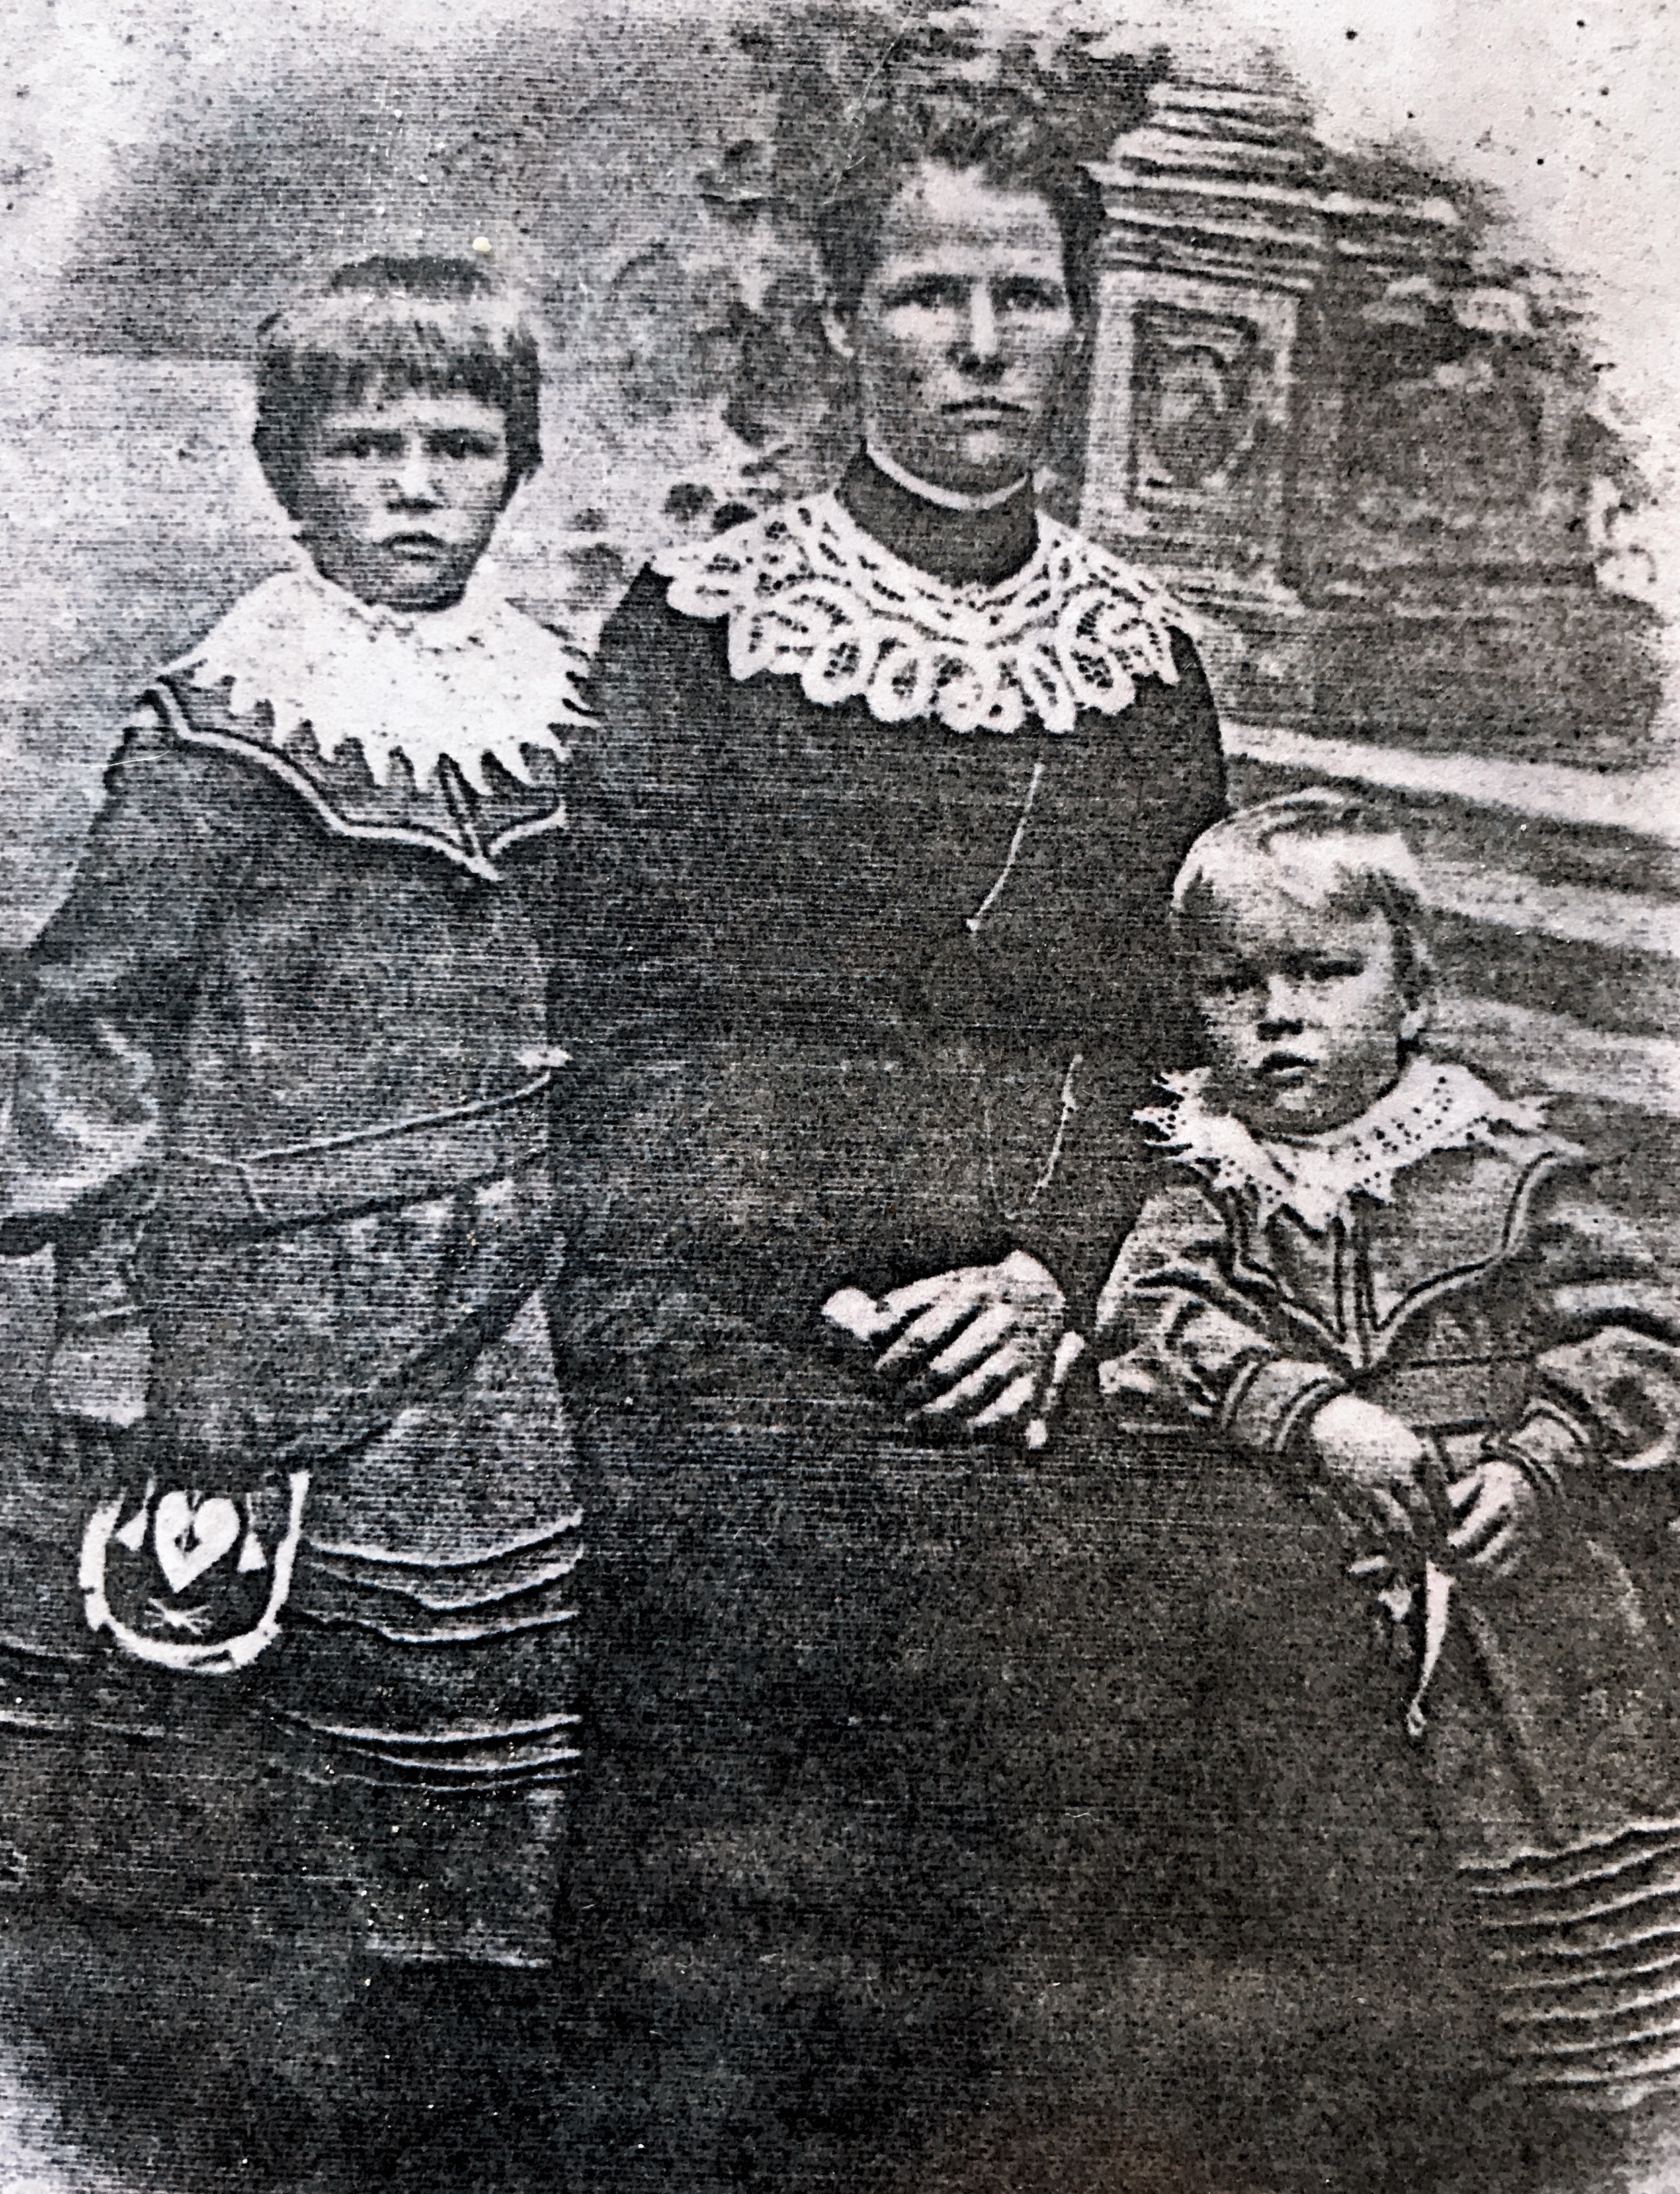 My grandmother, Anna Roos, with daughters Edith and Ruth, taken in Sweden, circa 1902 or 1903